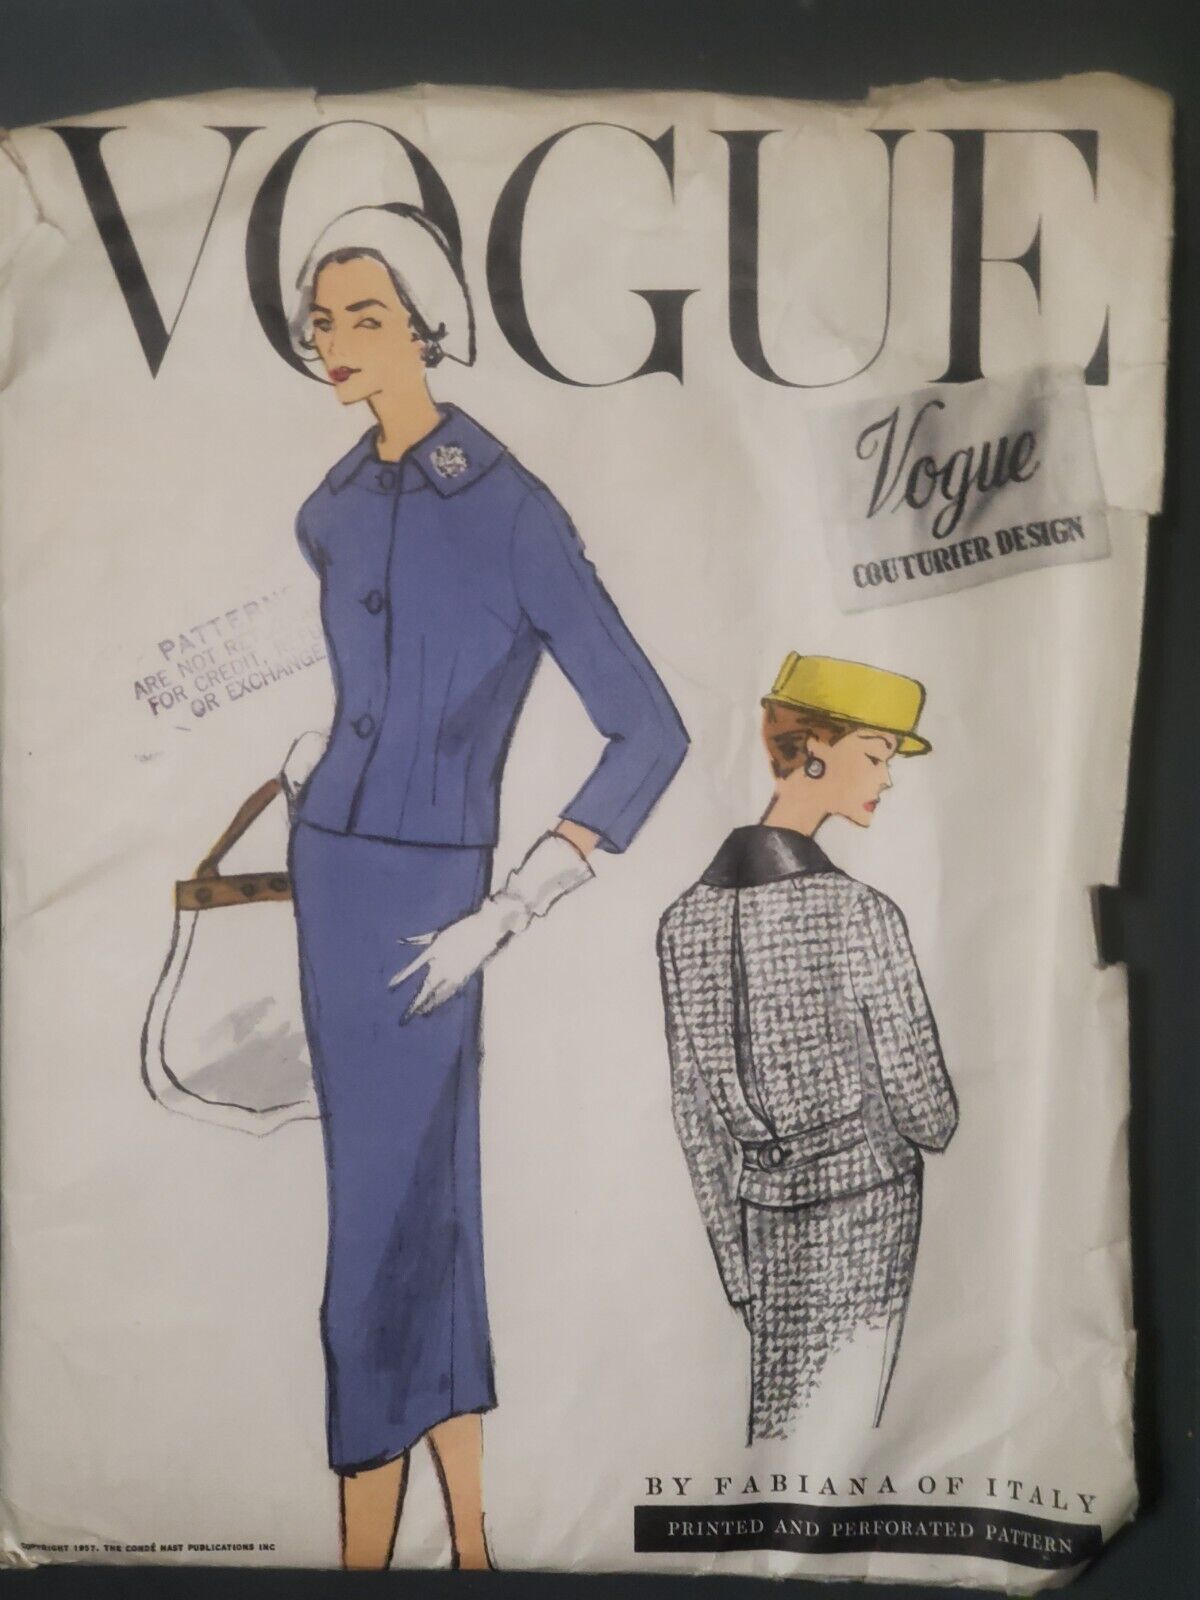 RARE Vintage 1957 VOGUE COUTURIER DESIGN No. 965 by Fabiana of Italy UNCUT